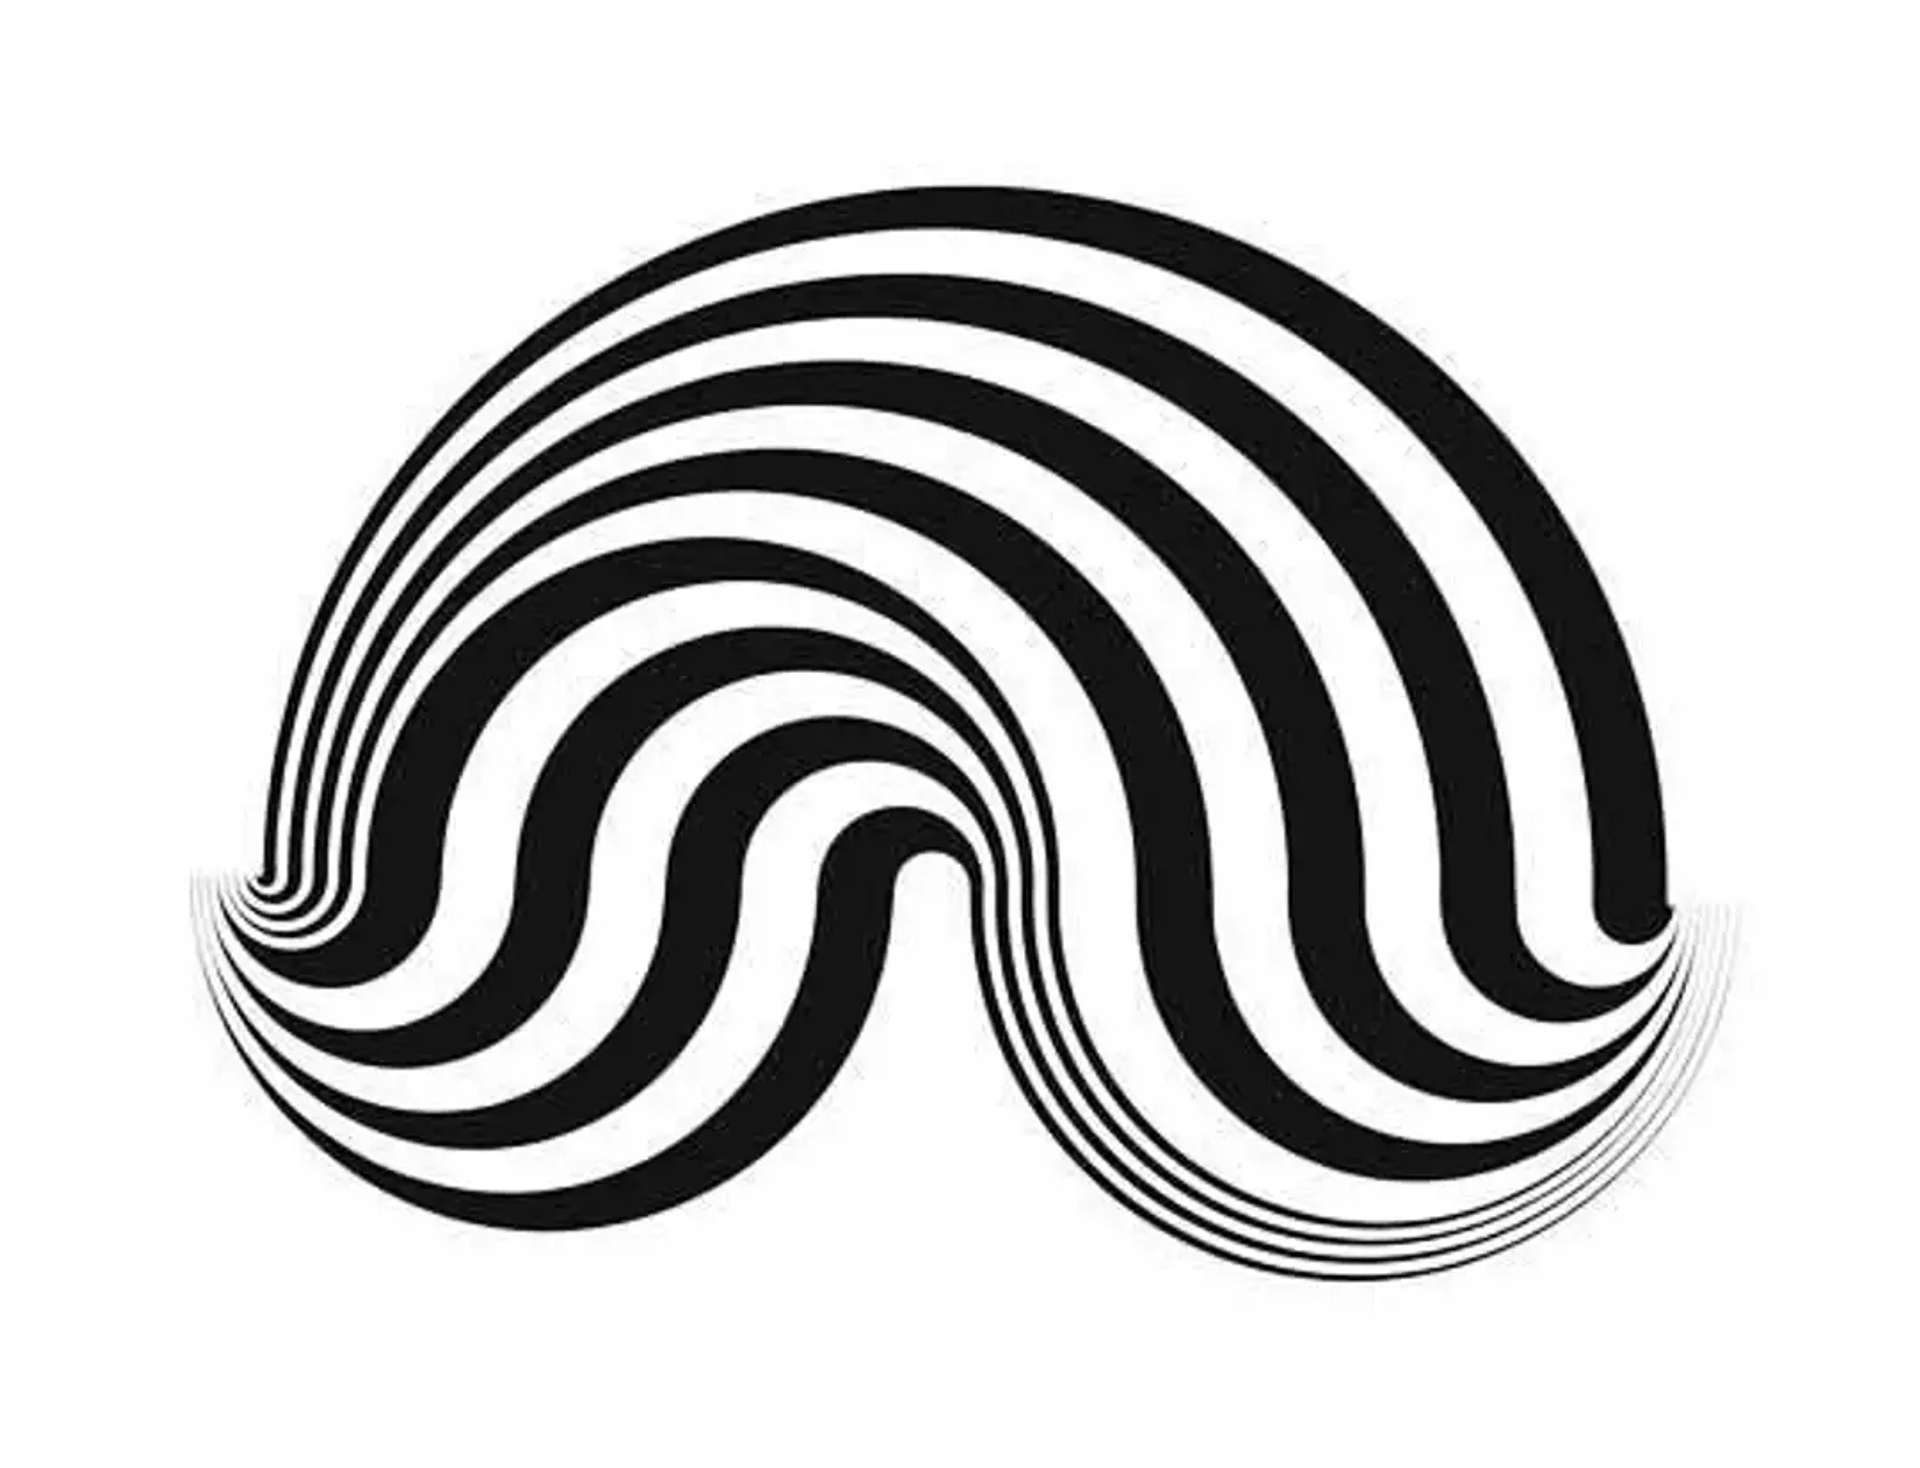 An image of the print Fragment 5 by Bridget Riley. It shows a semi-circle, drawn in white and black stripes that curve at the edges, giving the impression of movement.